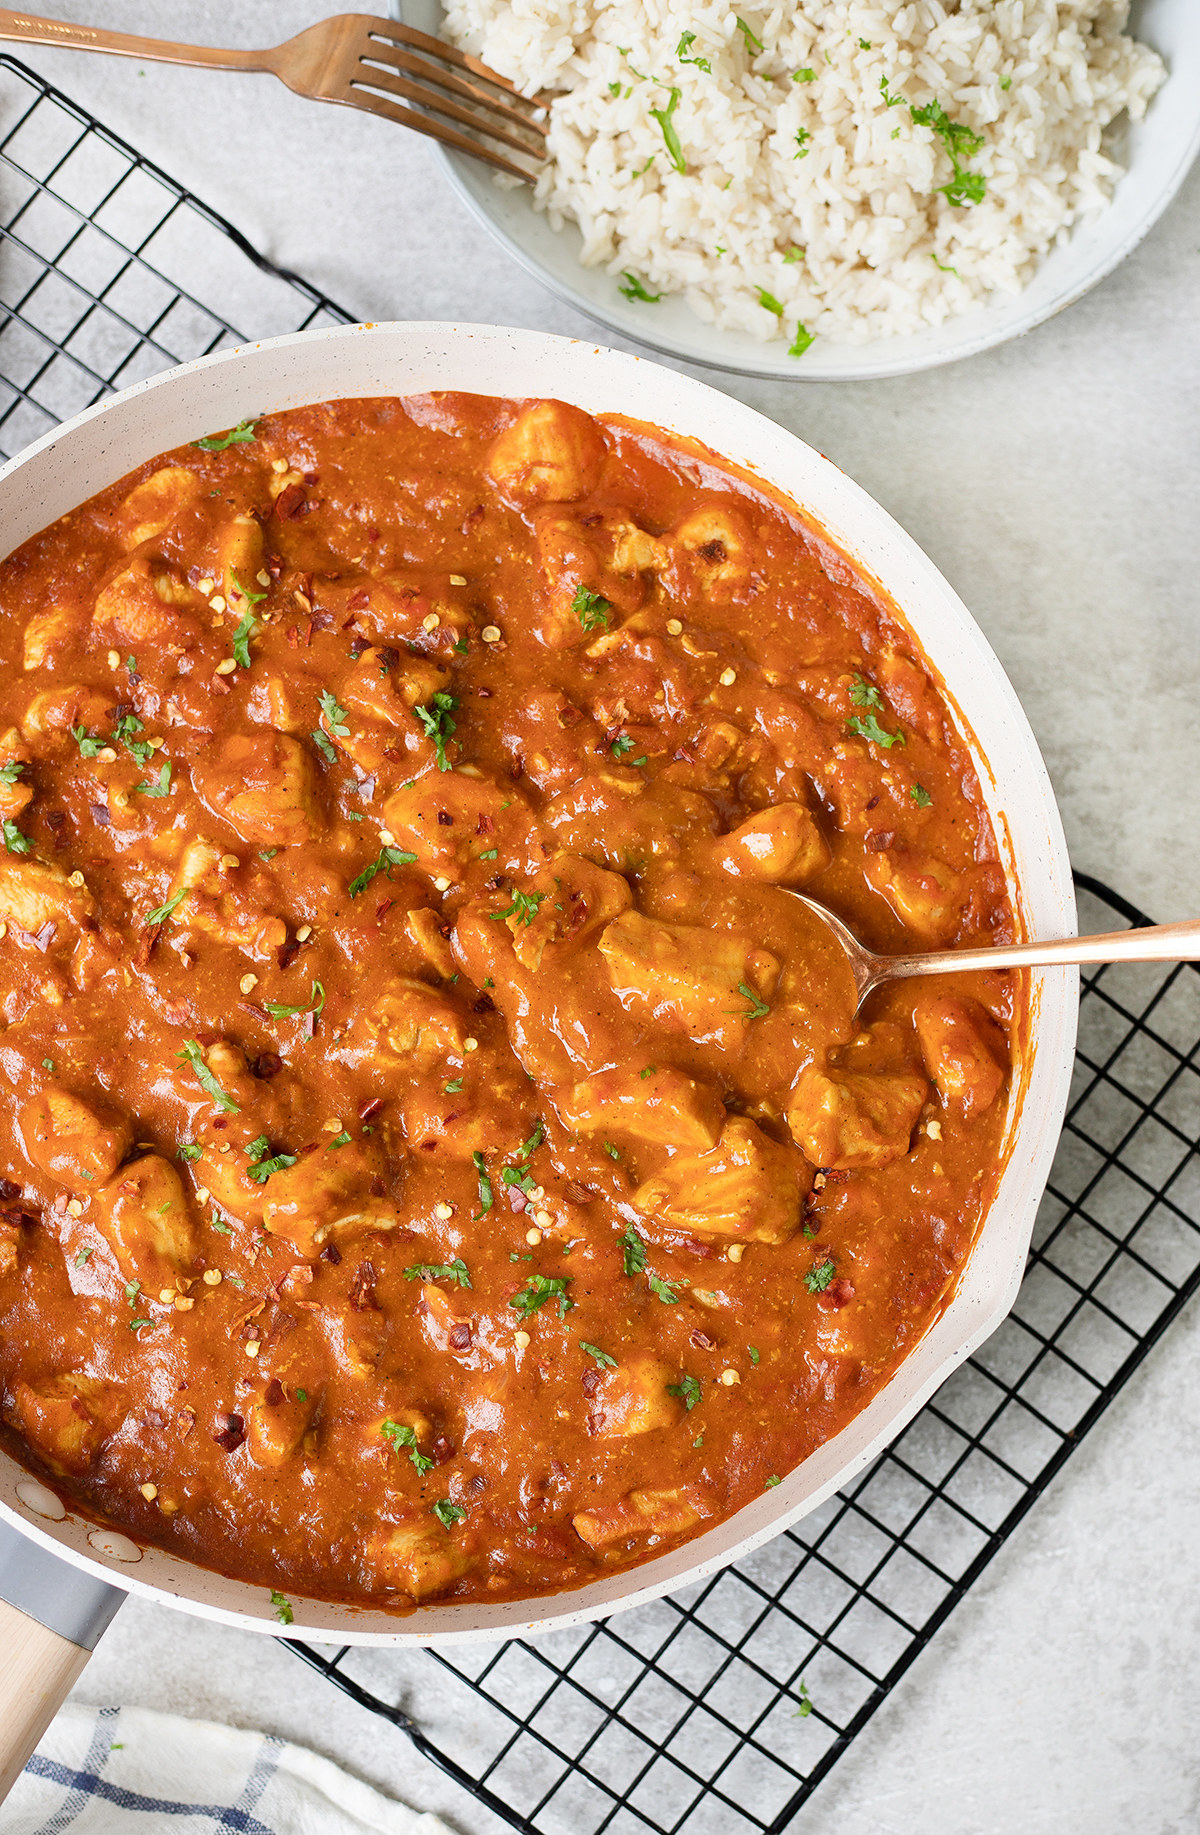 This Indian chicken curry recipe has a rich and flavorful taste, so easy to make and perfect for lunch or family dinner. The texture is also creamy and buttery.
